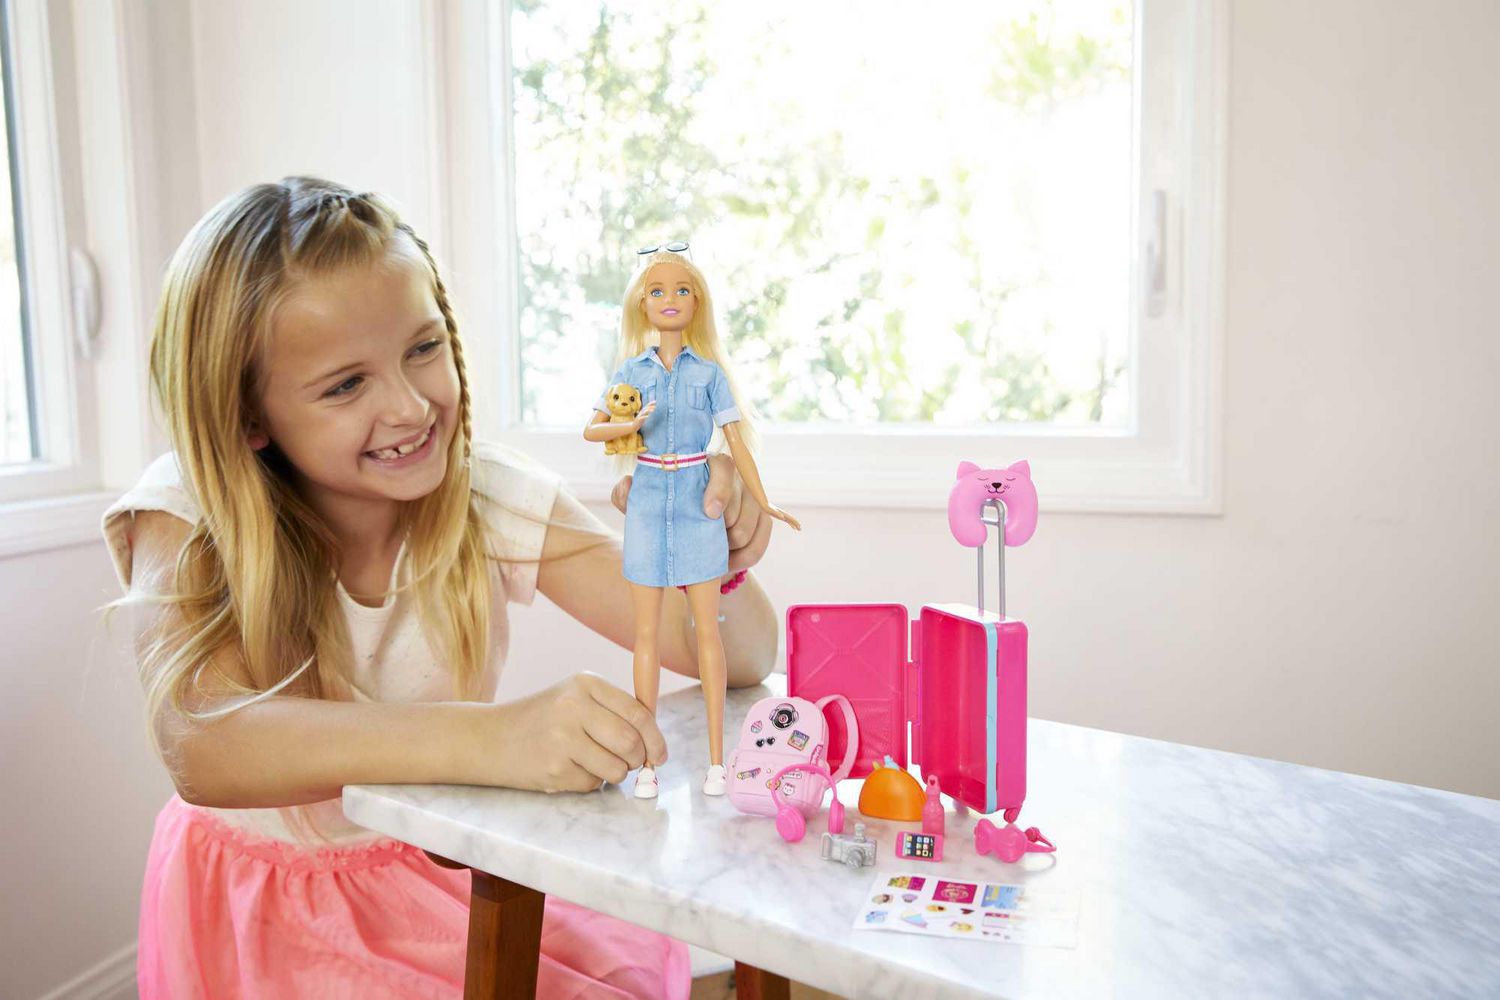 Barbie Dreamhouse Adventures Doll & Accessories, Travel Set with Daisy Doll  NIP 887961683790